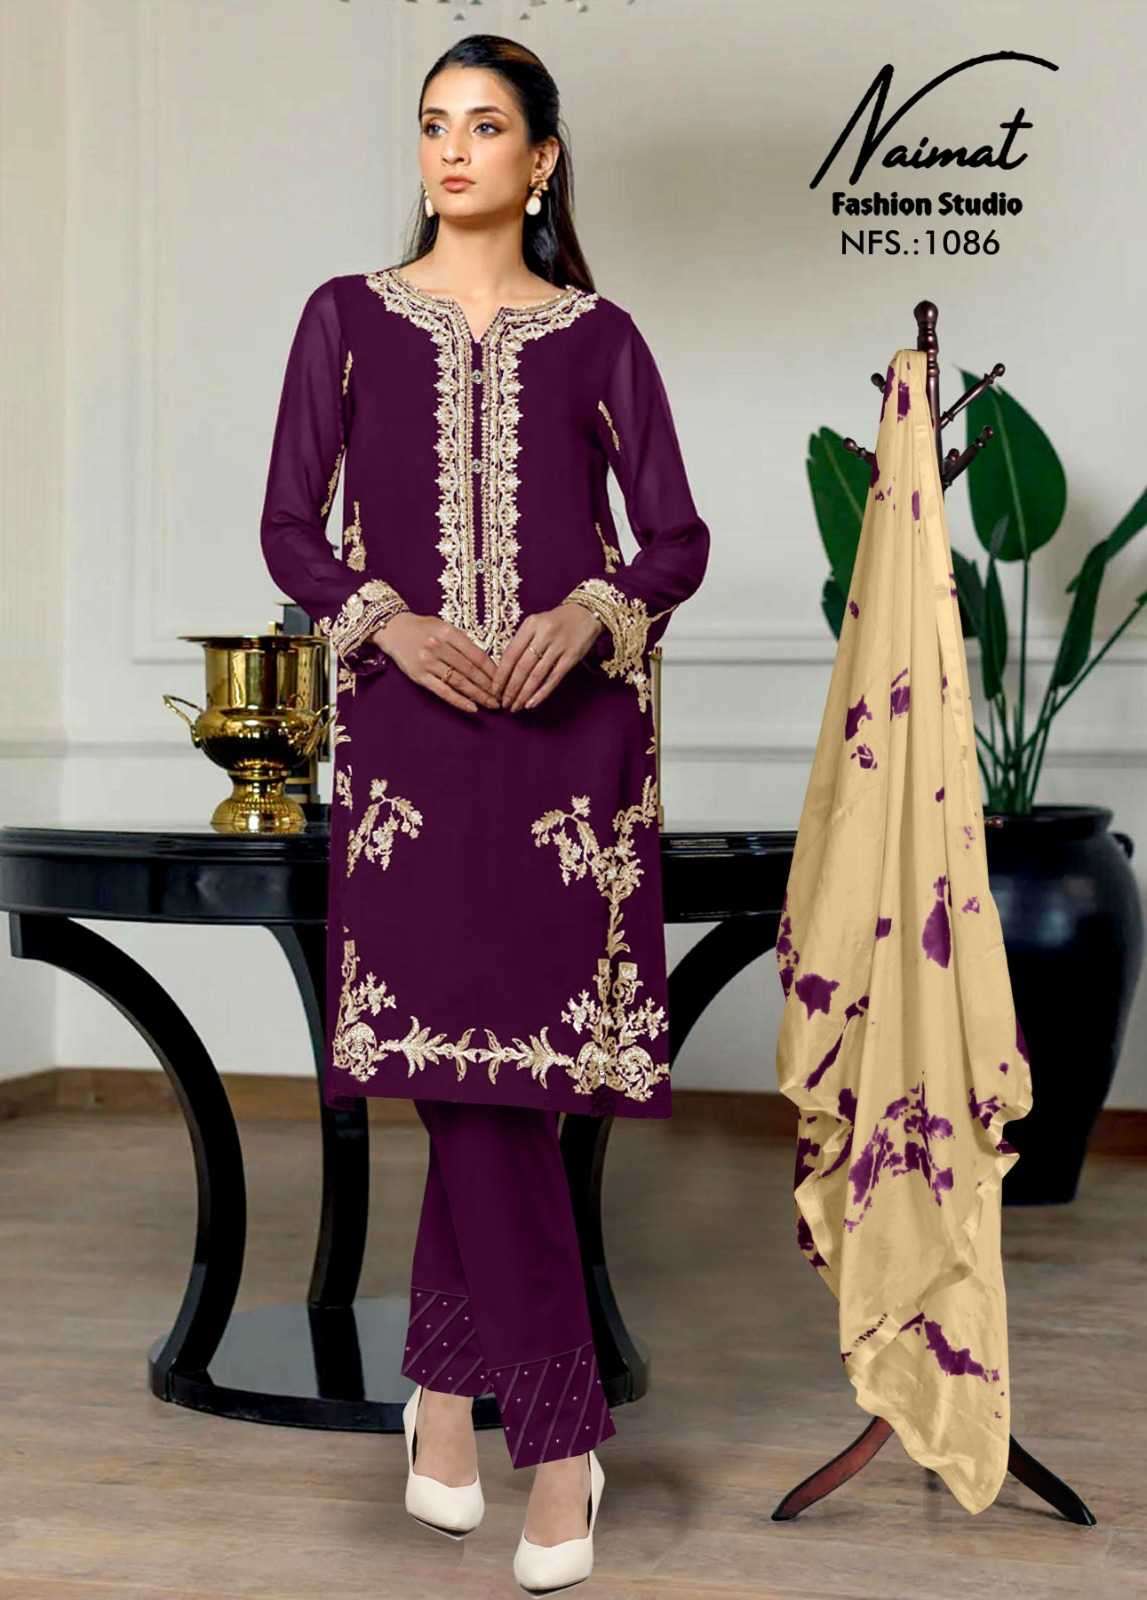 naimat 1086 Pure Blooming Fox suit